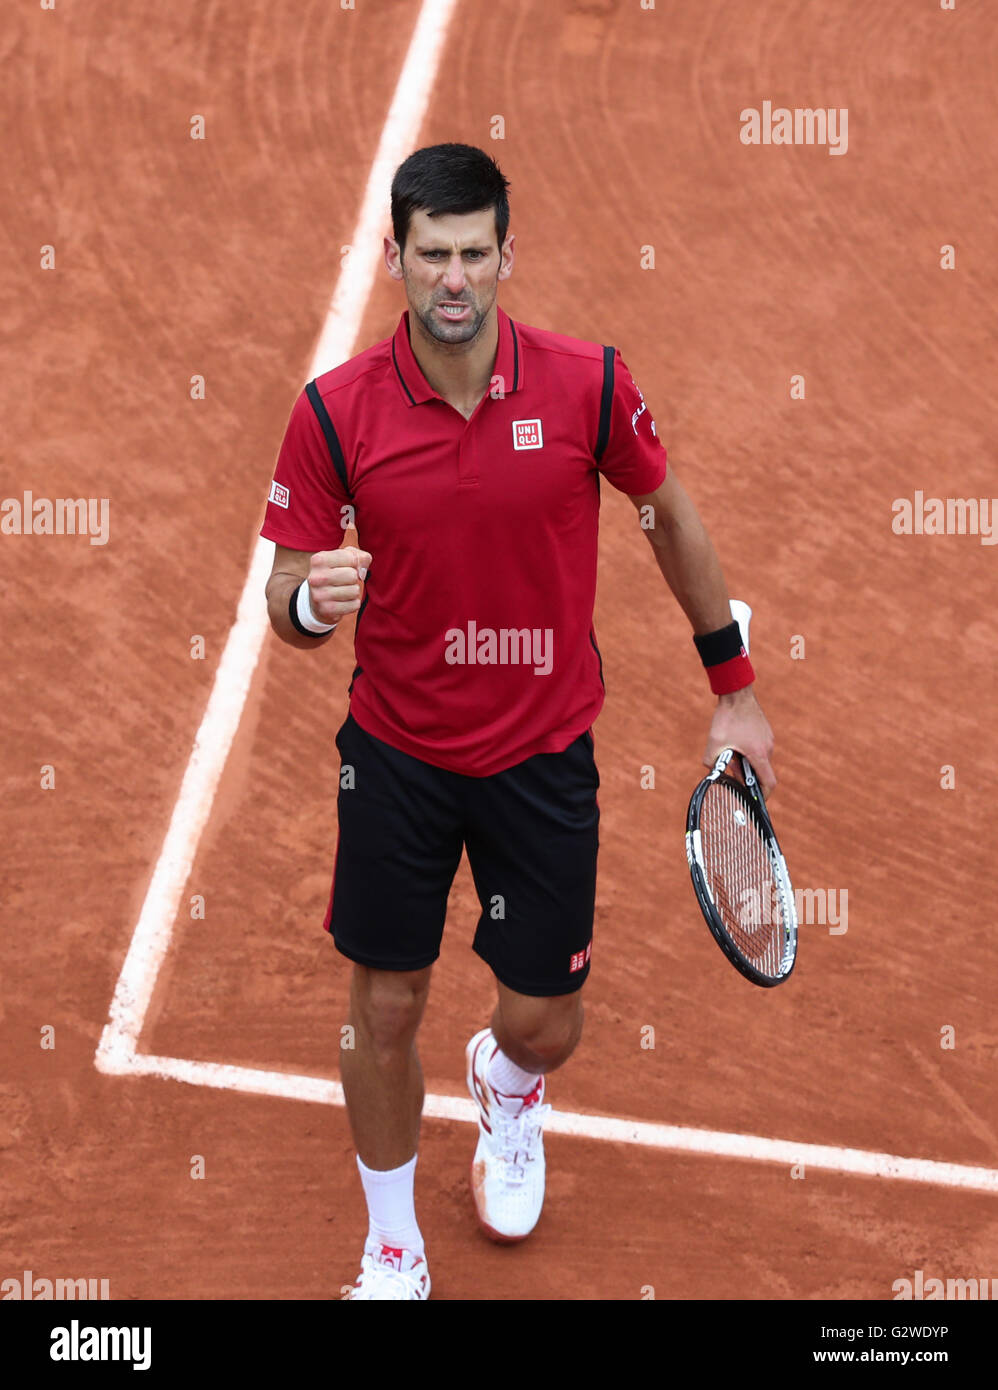 Paris, France. 3rd June, 2016. Novak Djokovic of Serbia reacts during the men's  singles semifinal against Dominic Thiem of Austria on day 13 of 2016 French  Open tennis tournament at Roland Garros,